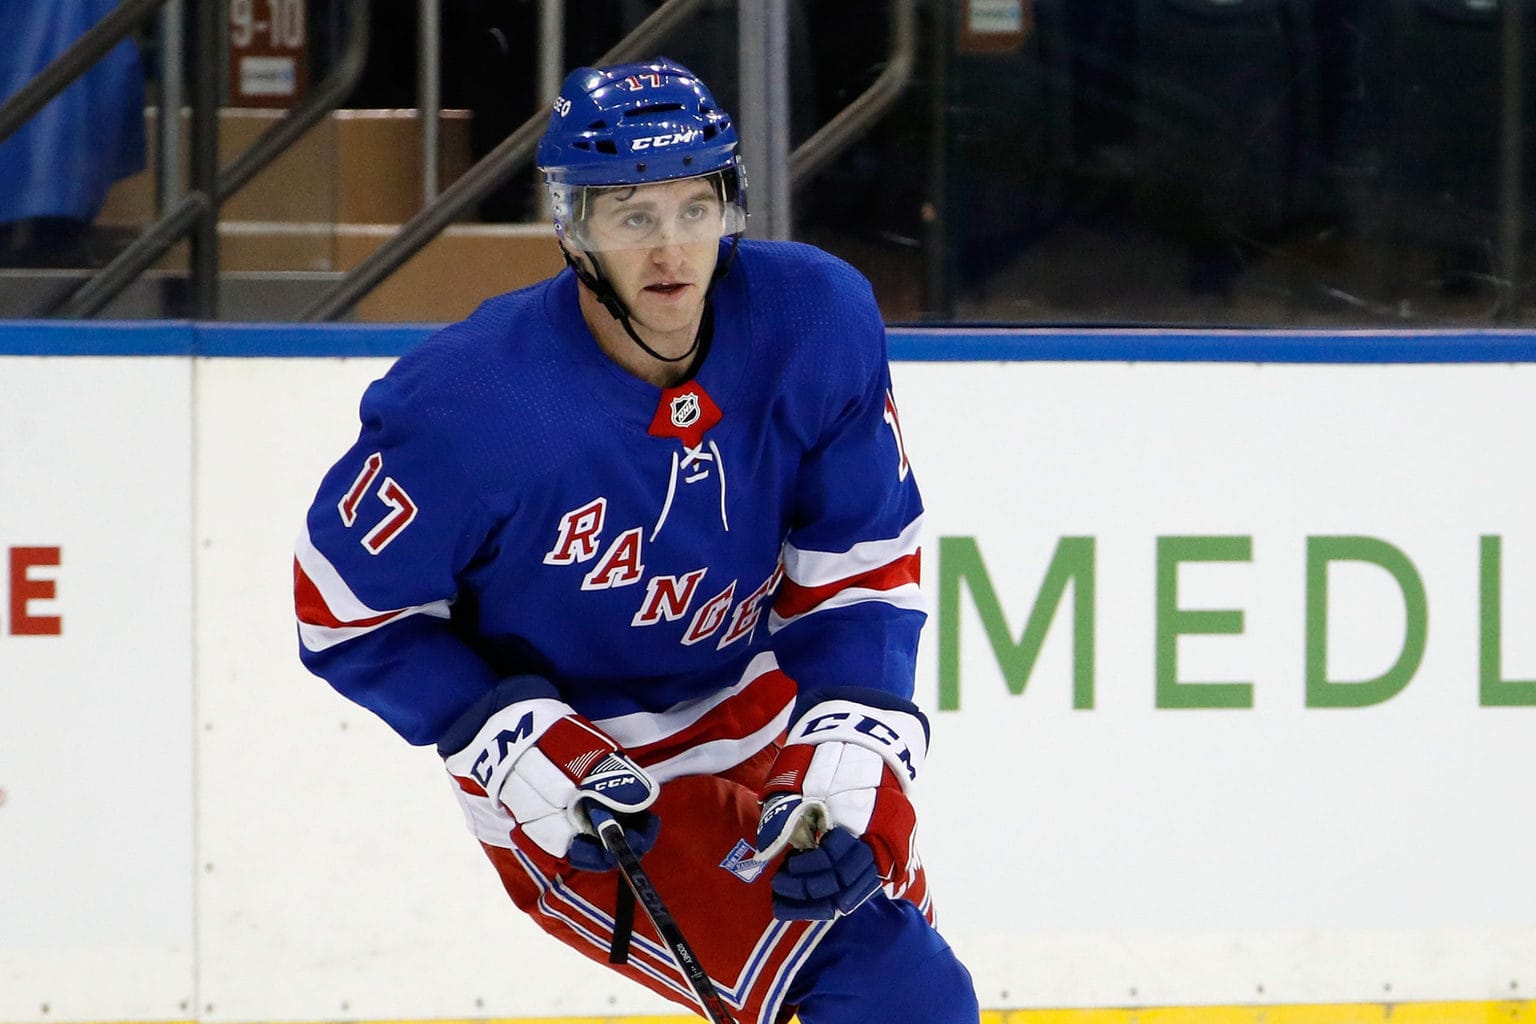 On the Rangers protecting Rooney over Blackwell or Gauthier